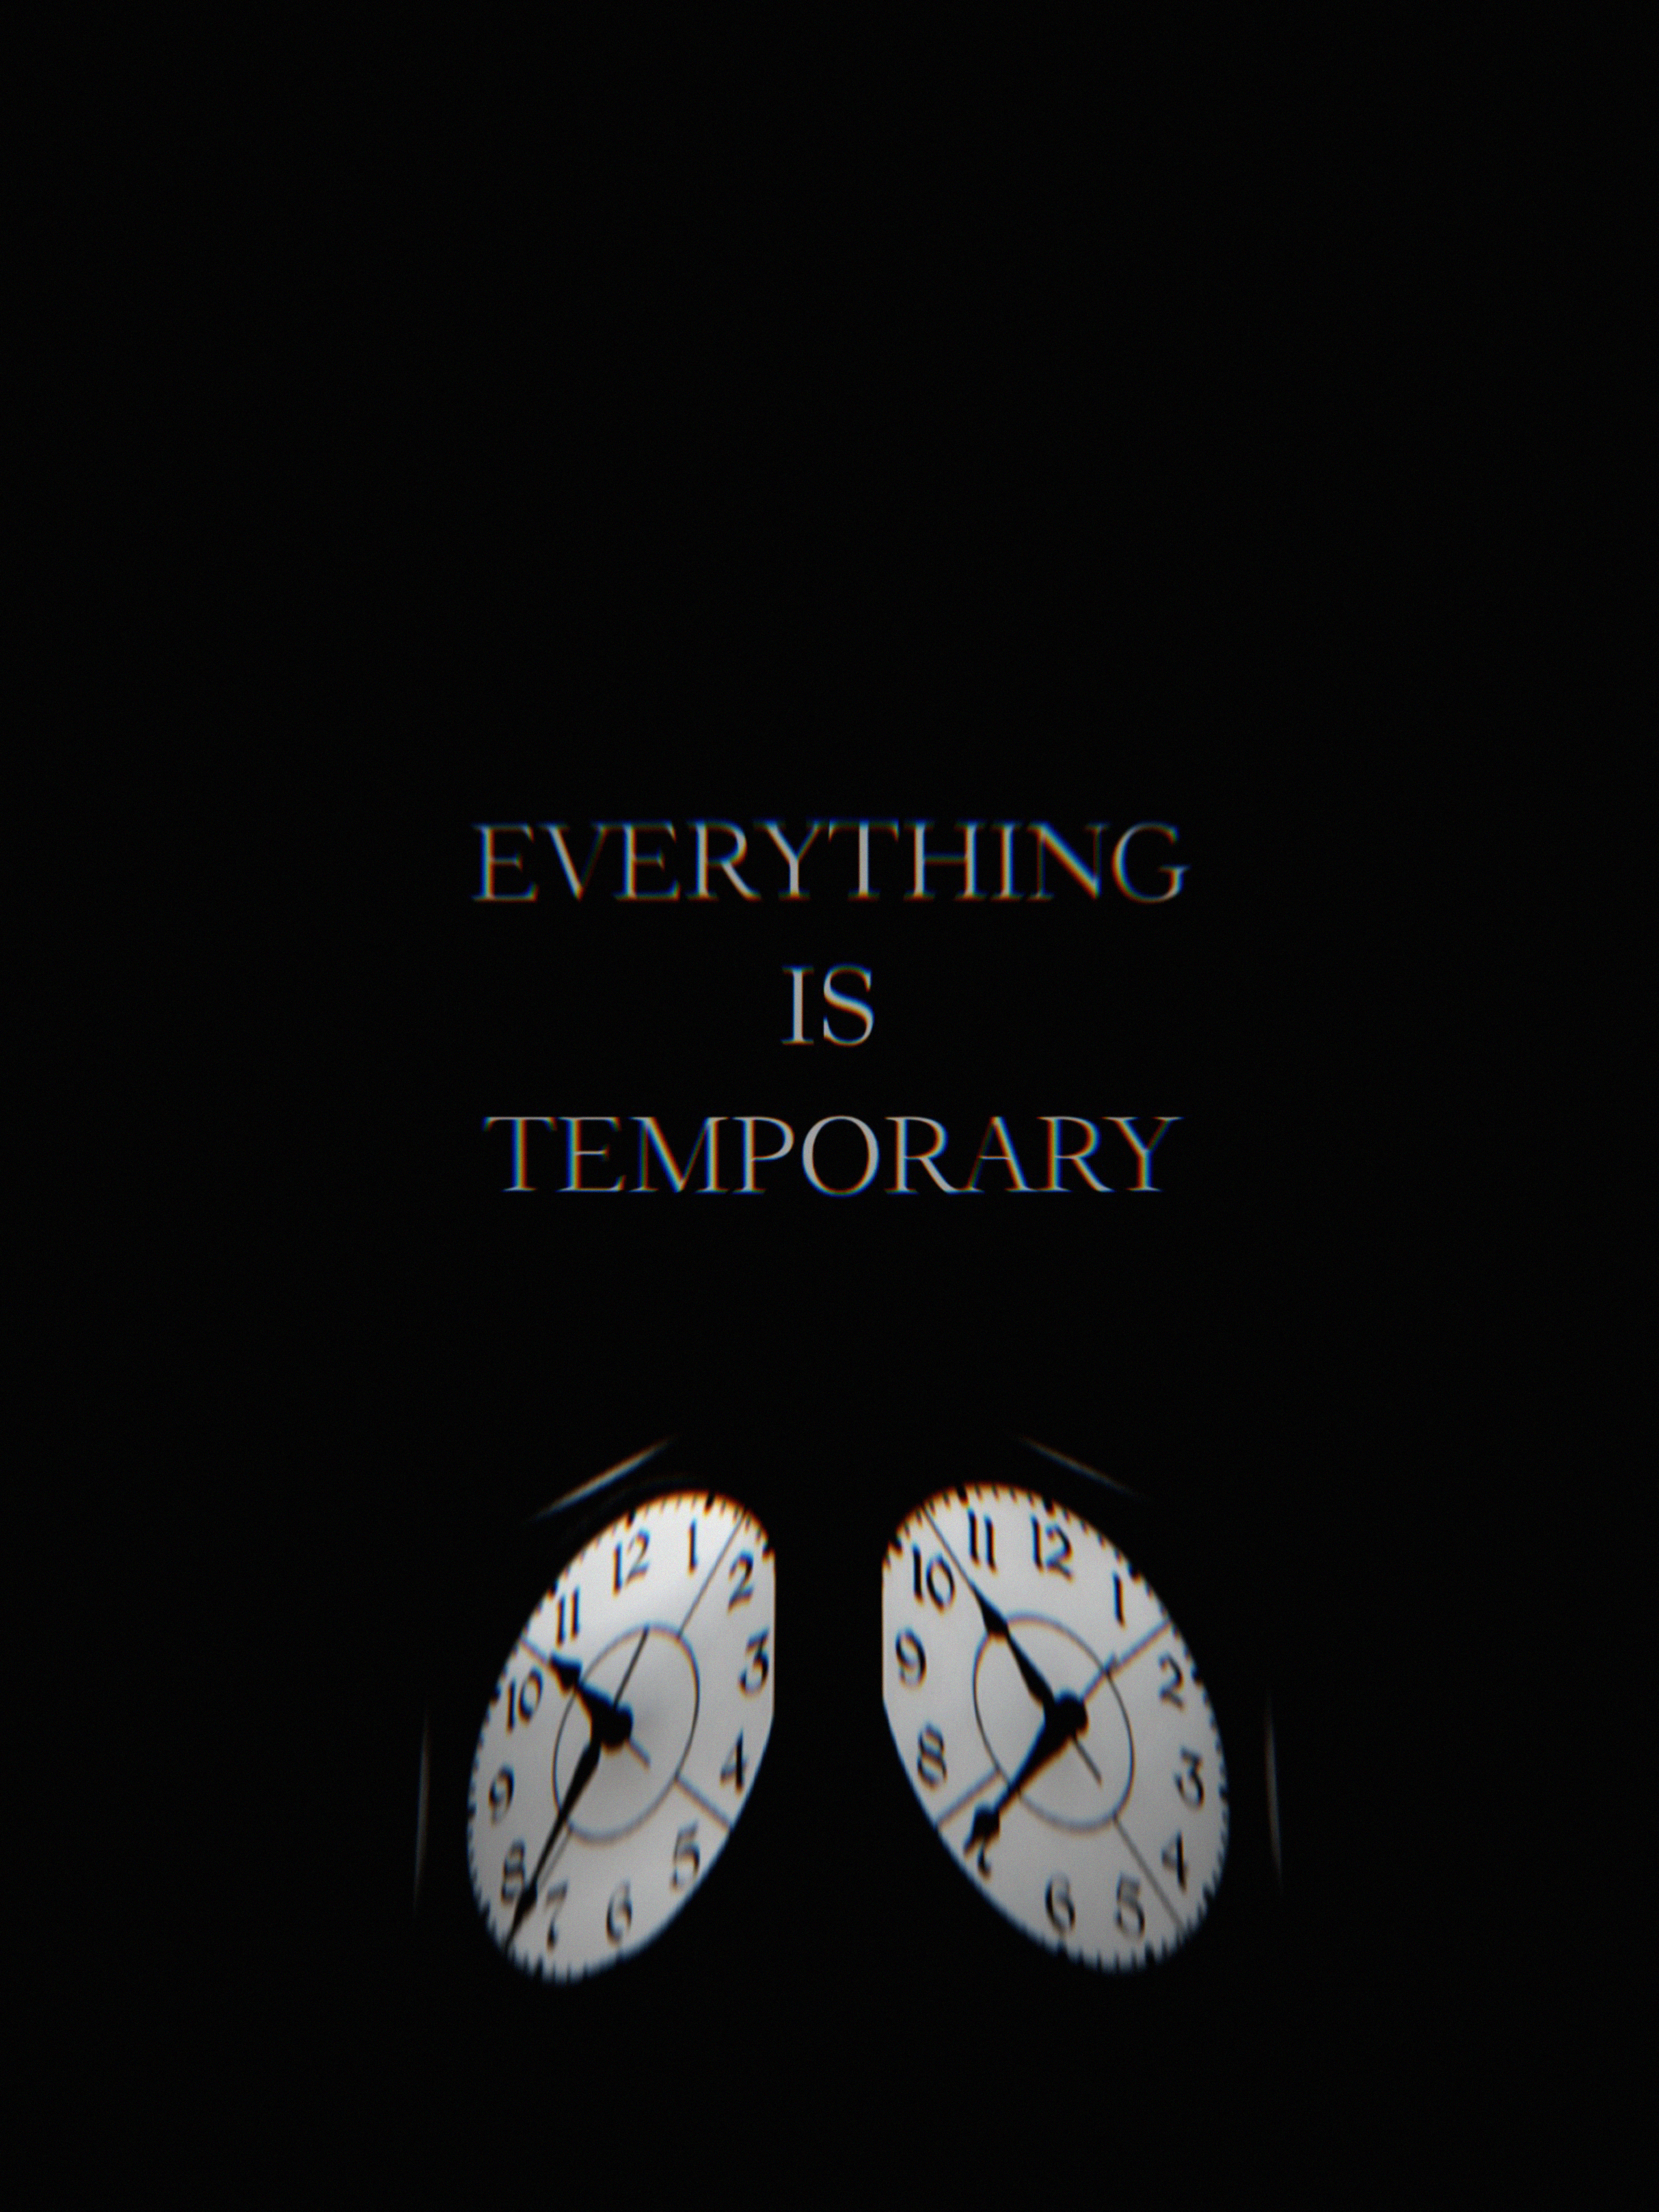 time, life, words, it's time, clock, glitch, temporary